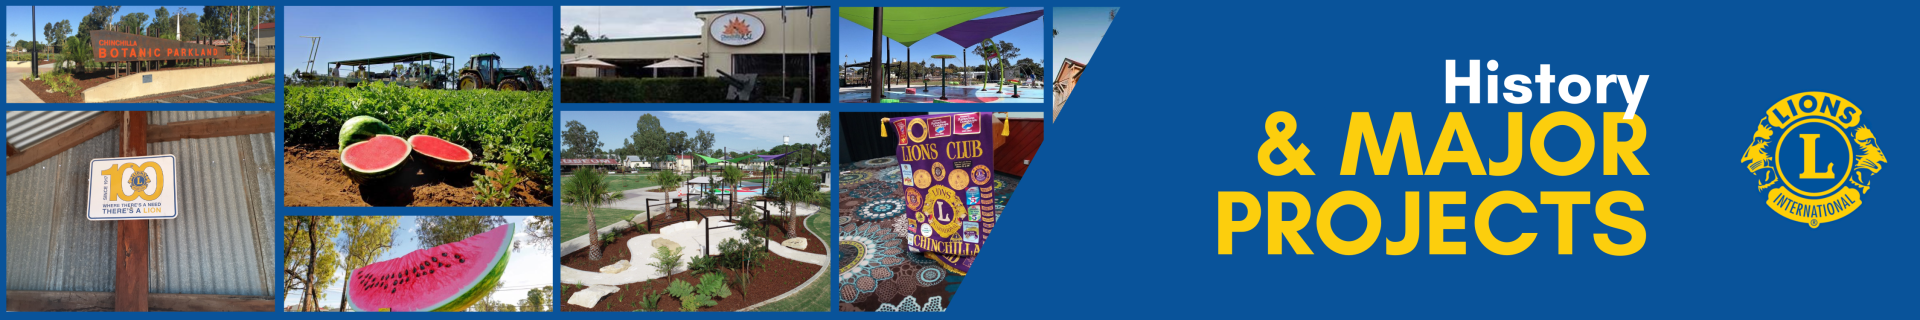 Lions Club Chinchilla History & Major Projects Banner